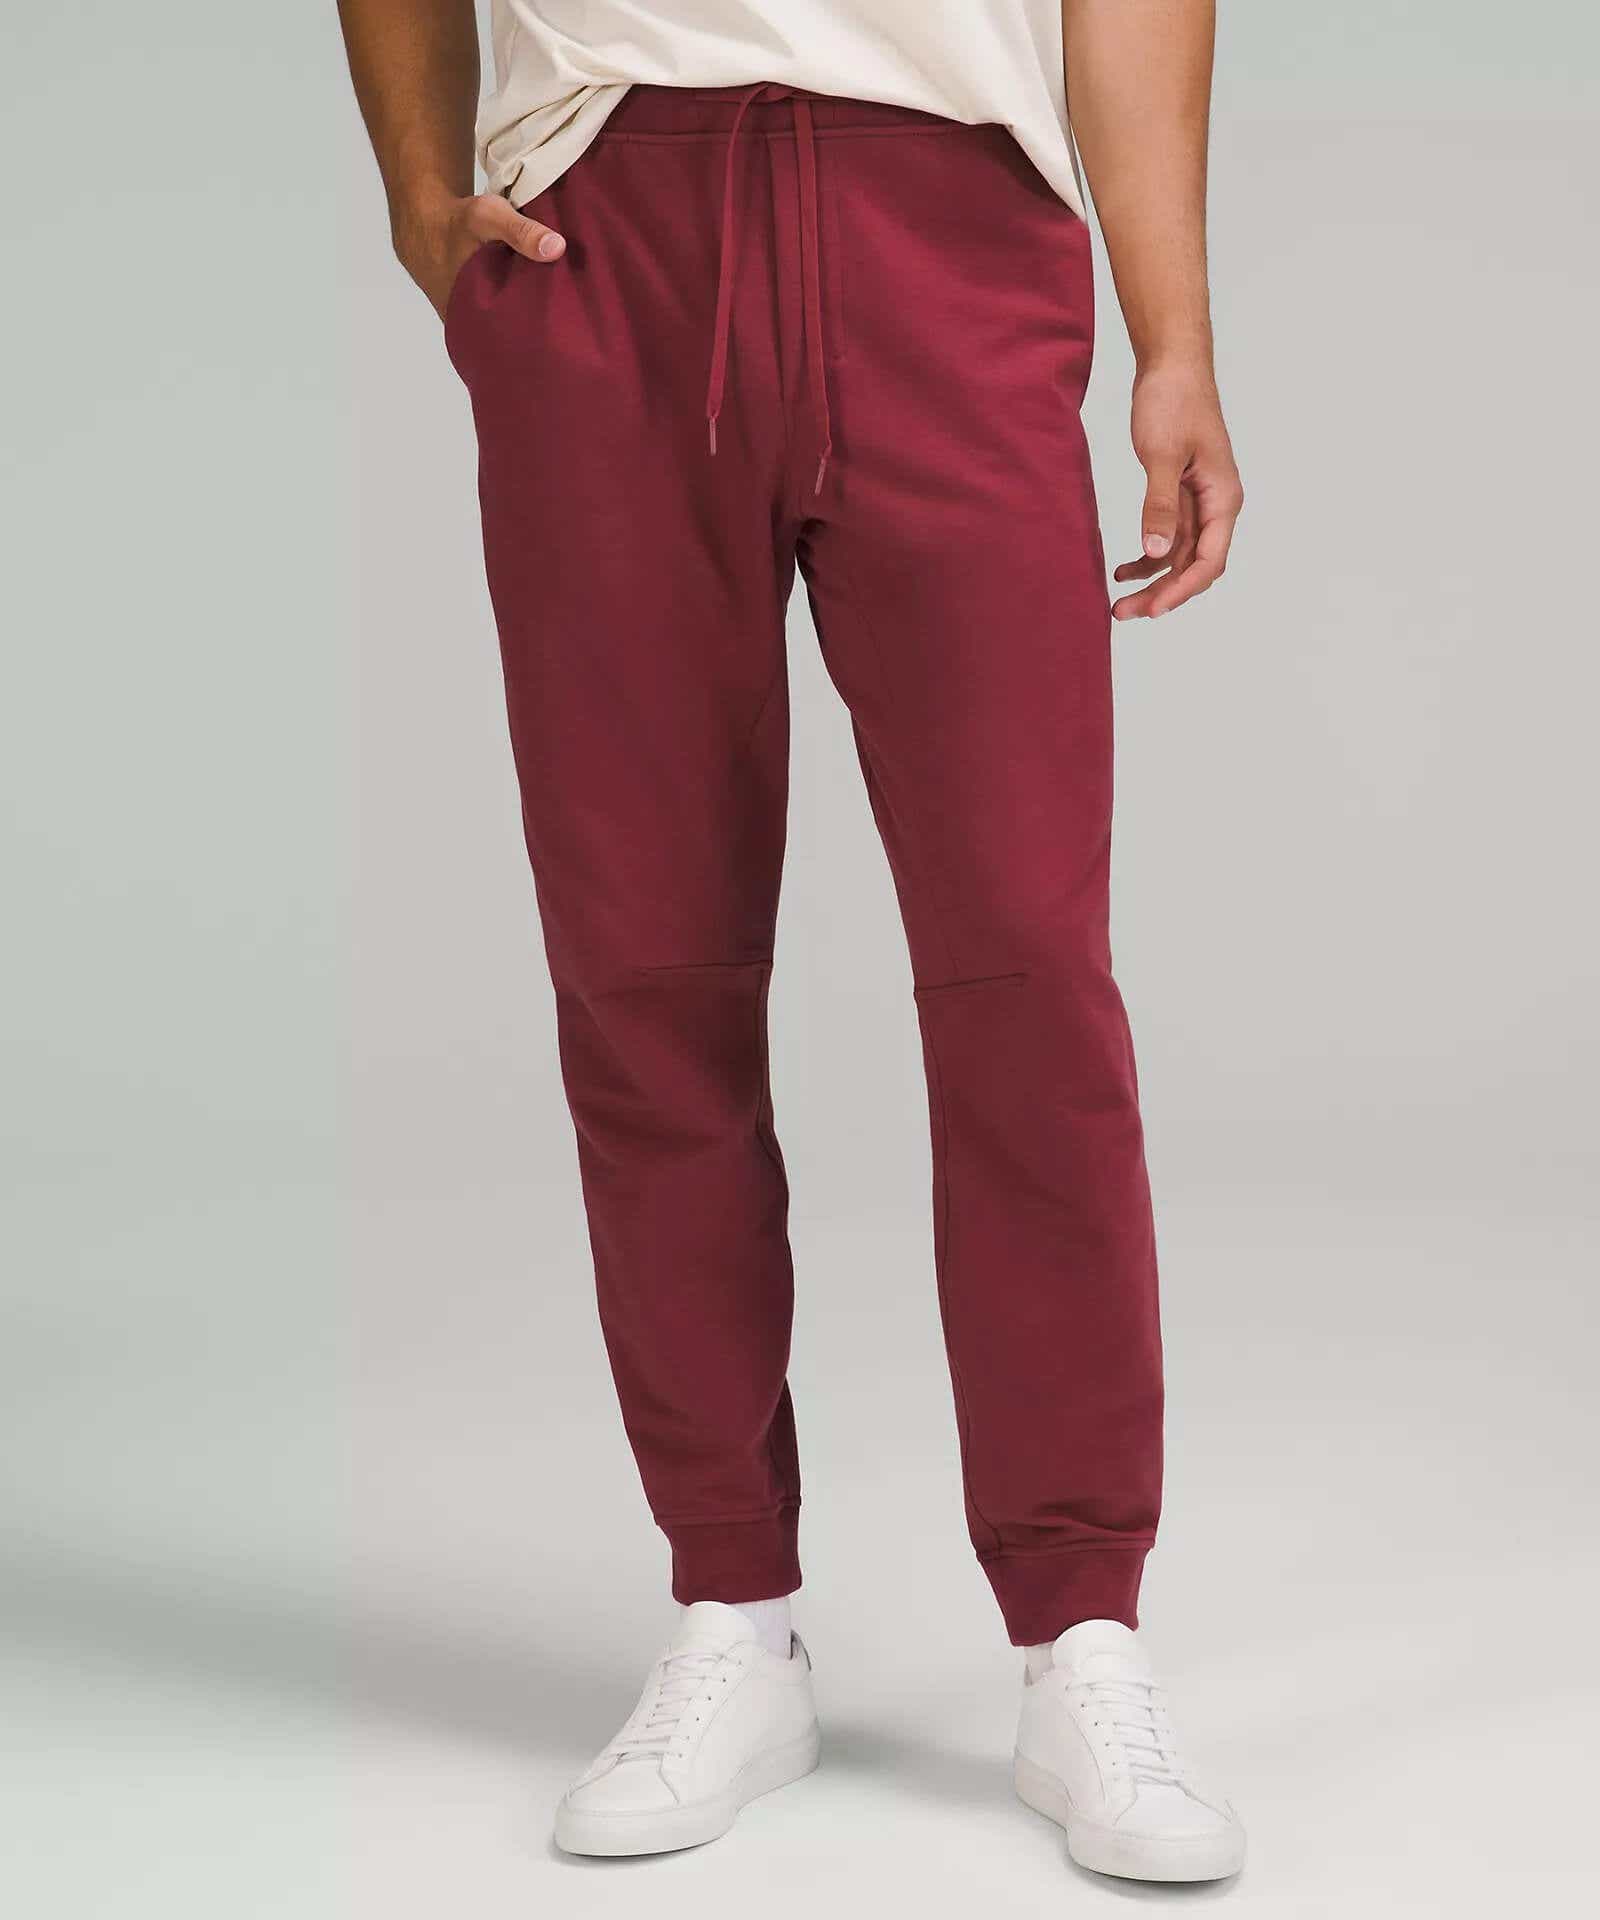 Lululemon We Made Too Much: City Sleet 5 Pocket Pants are only $109